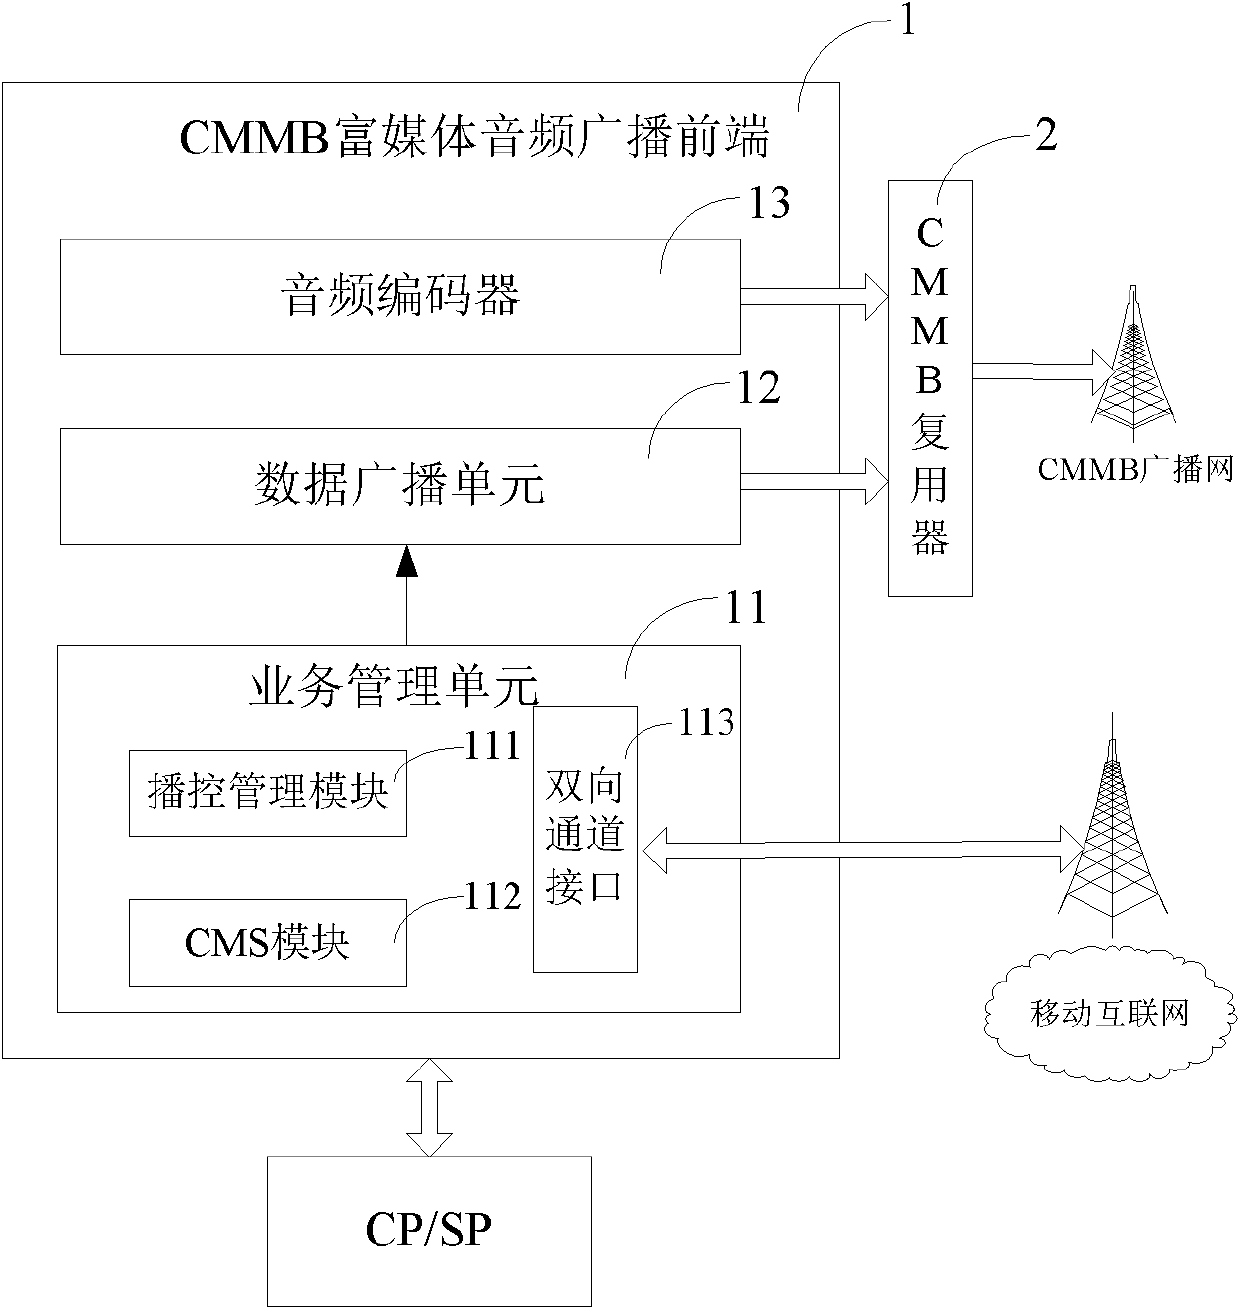 China mobile multimedia broadcasting (CMMB)-based rich media audio broadcasting front-end and system